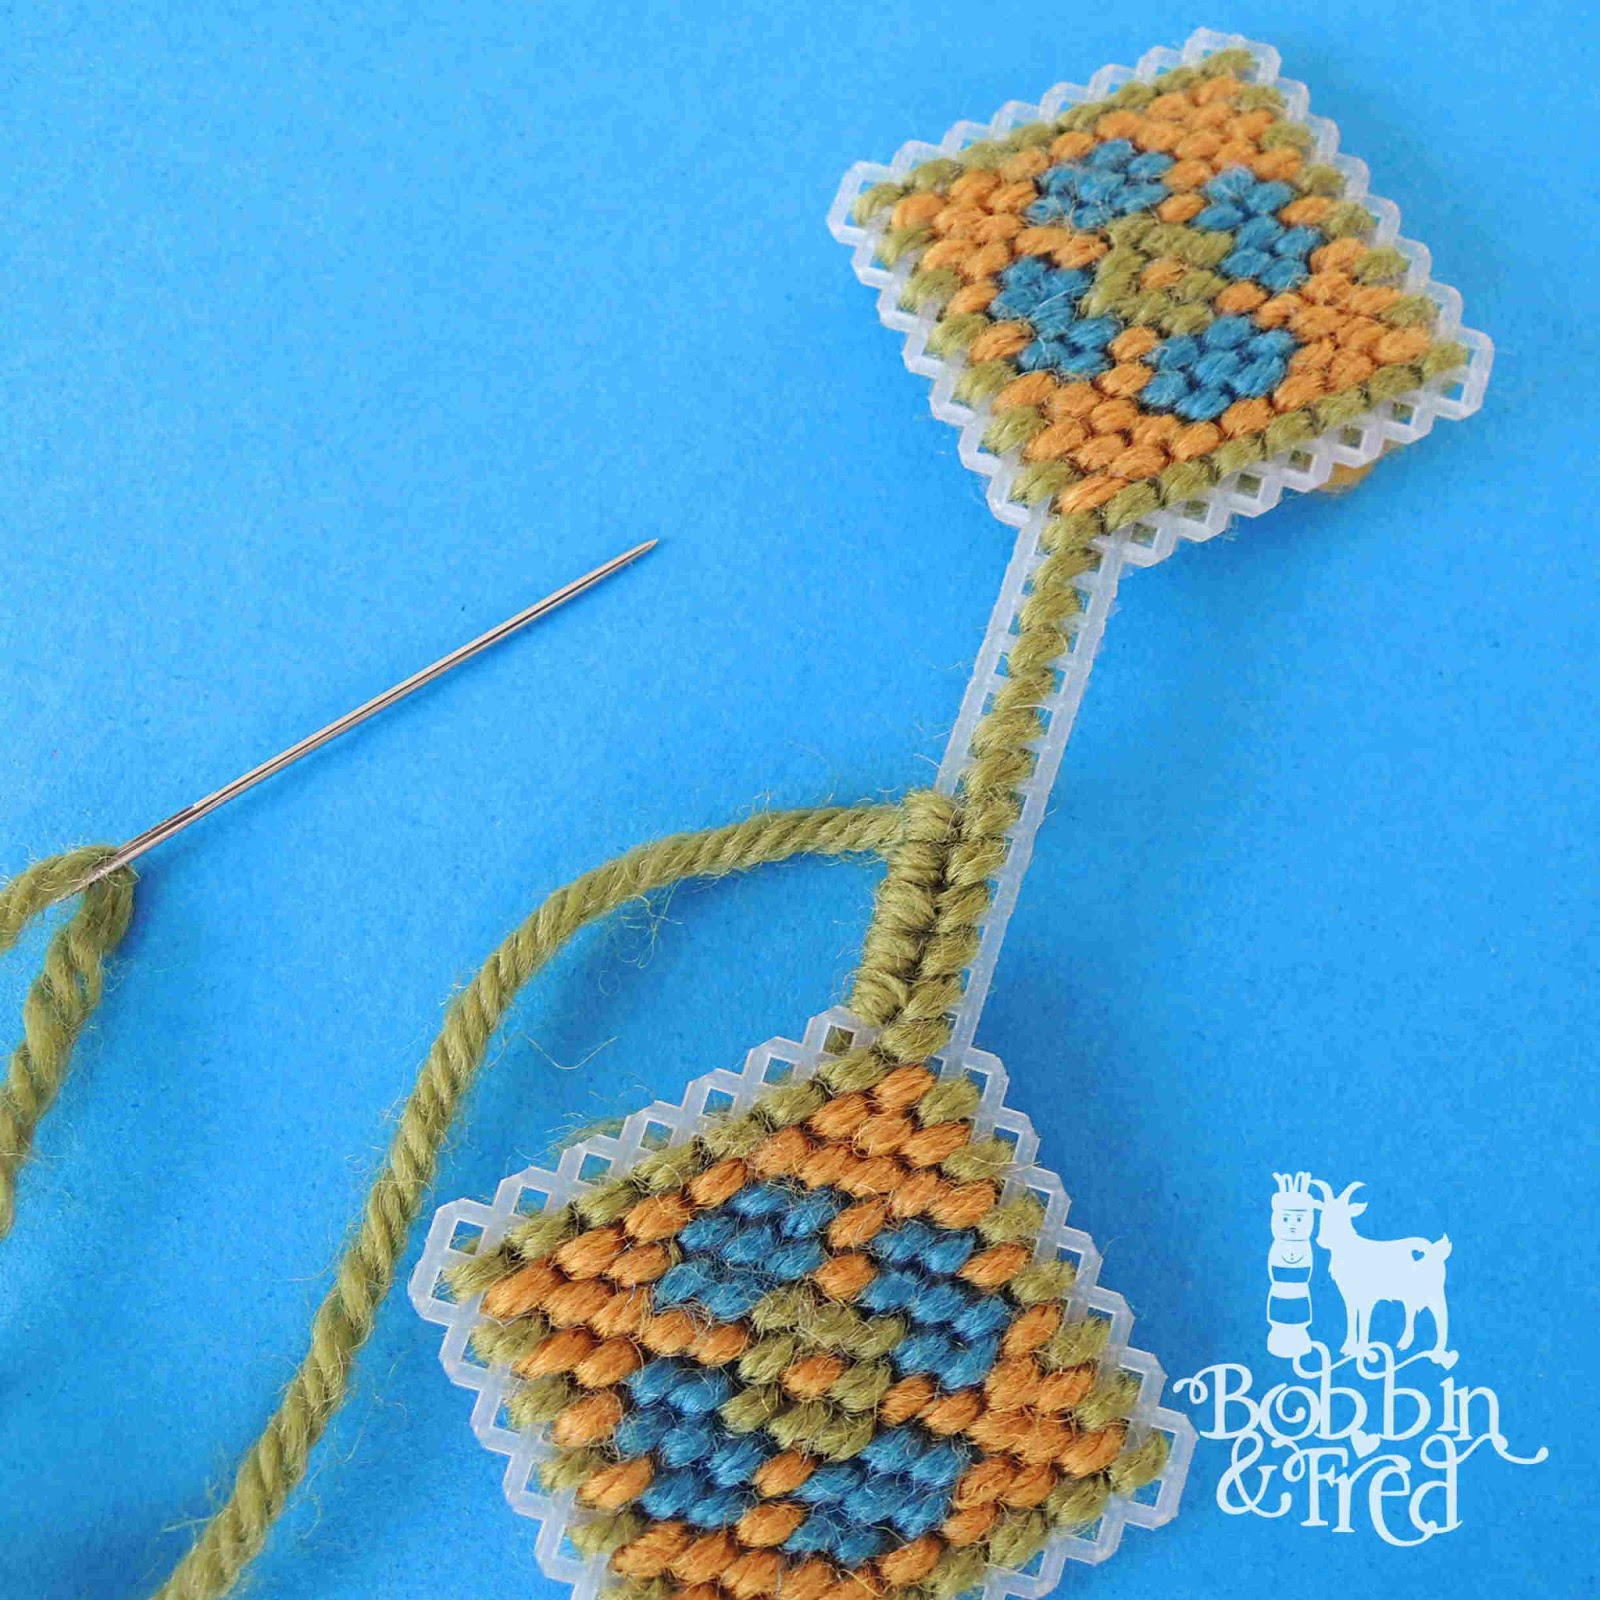 Thimble Review and DIY Needlepoint Earrings